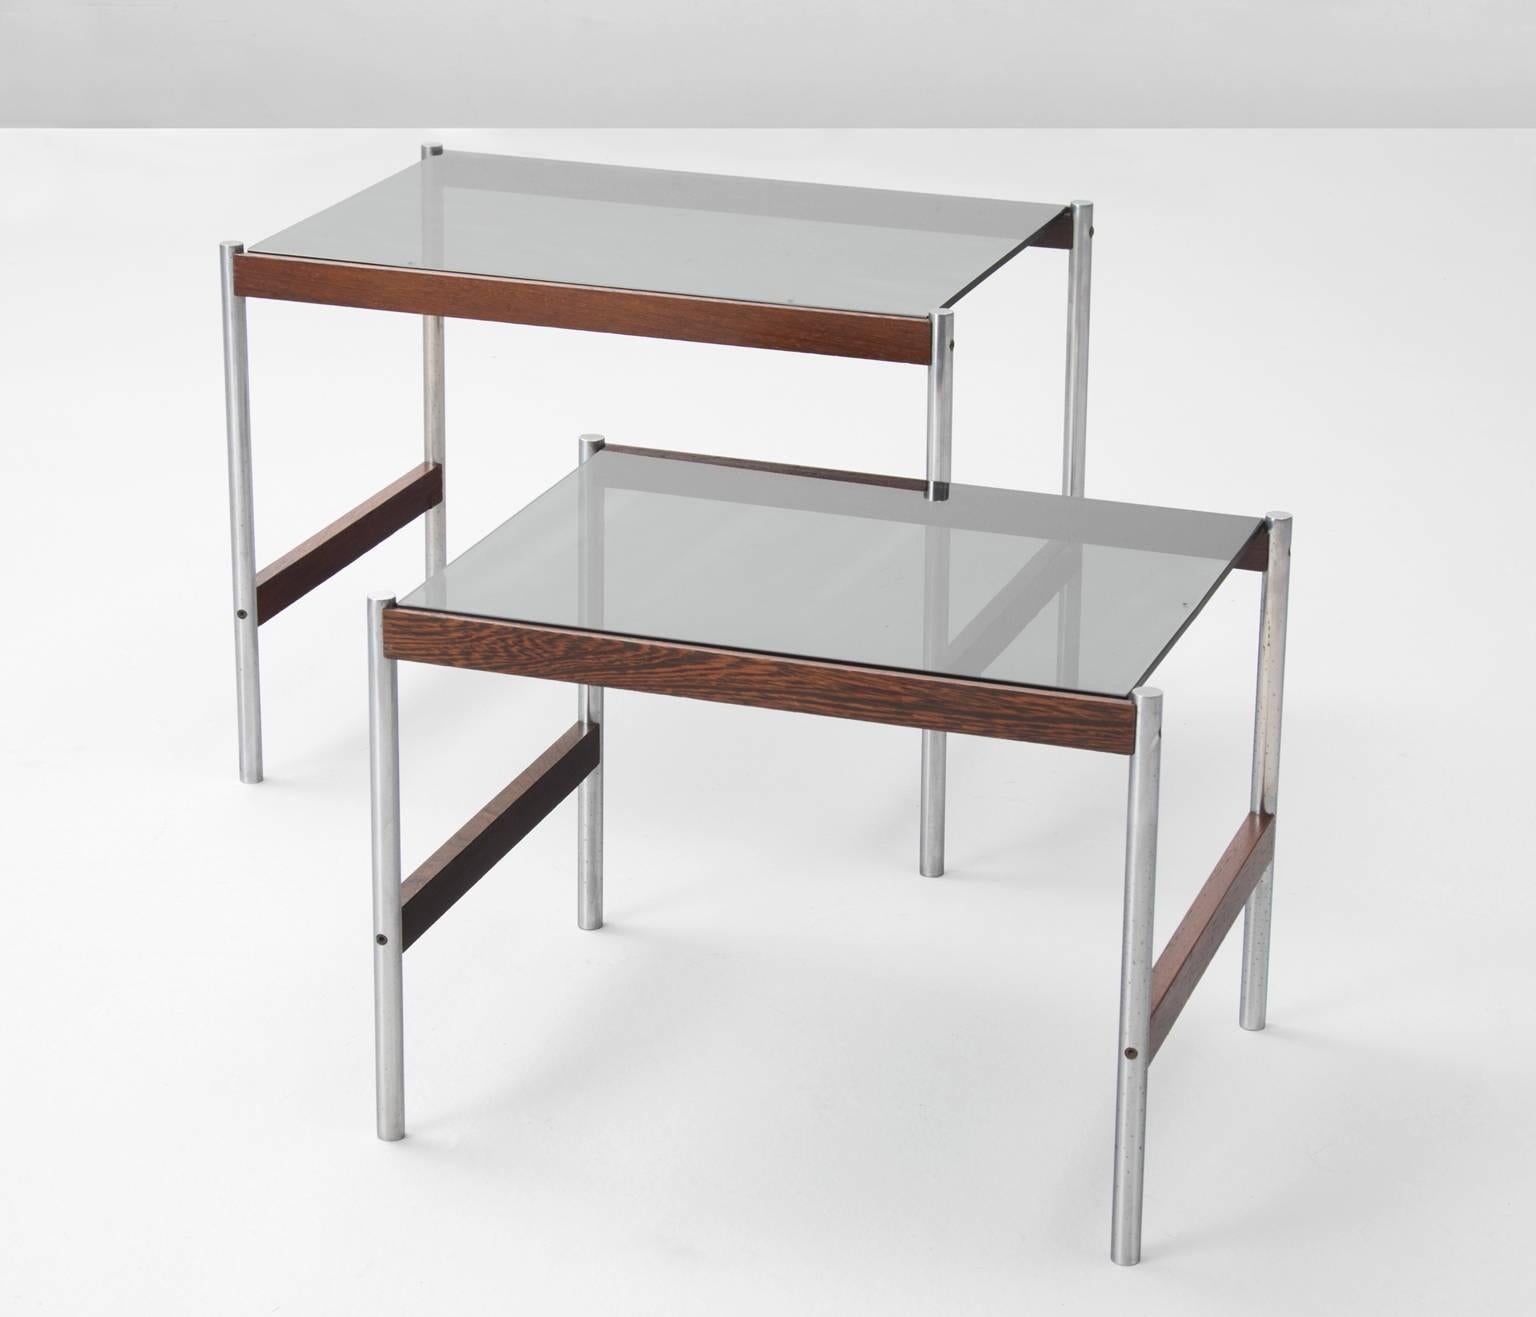 These lovely versatile nesting tables are beautifully composed of various materials such as brushed steel and wood, accompanied with smoked glass table tops. Designed by Artifort, the Netherlands 1960s.

Due to the subtle design the tables appear